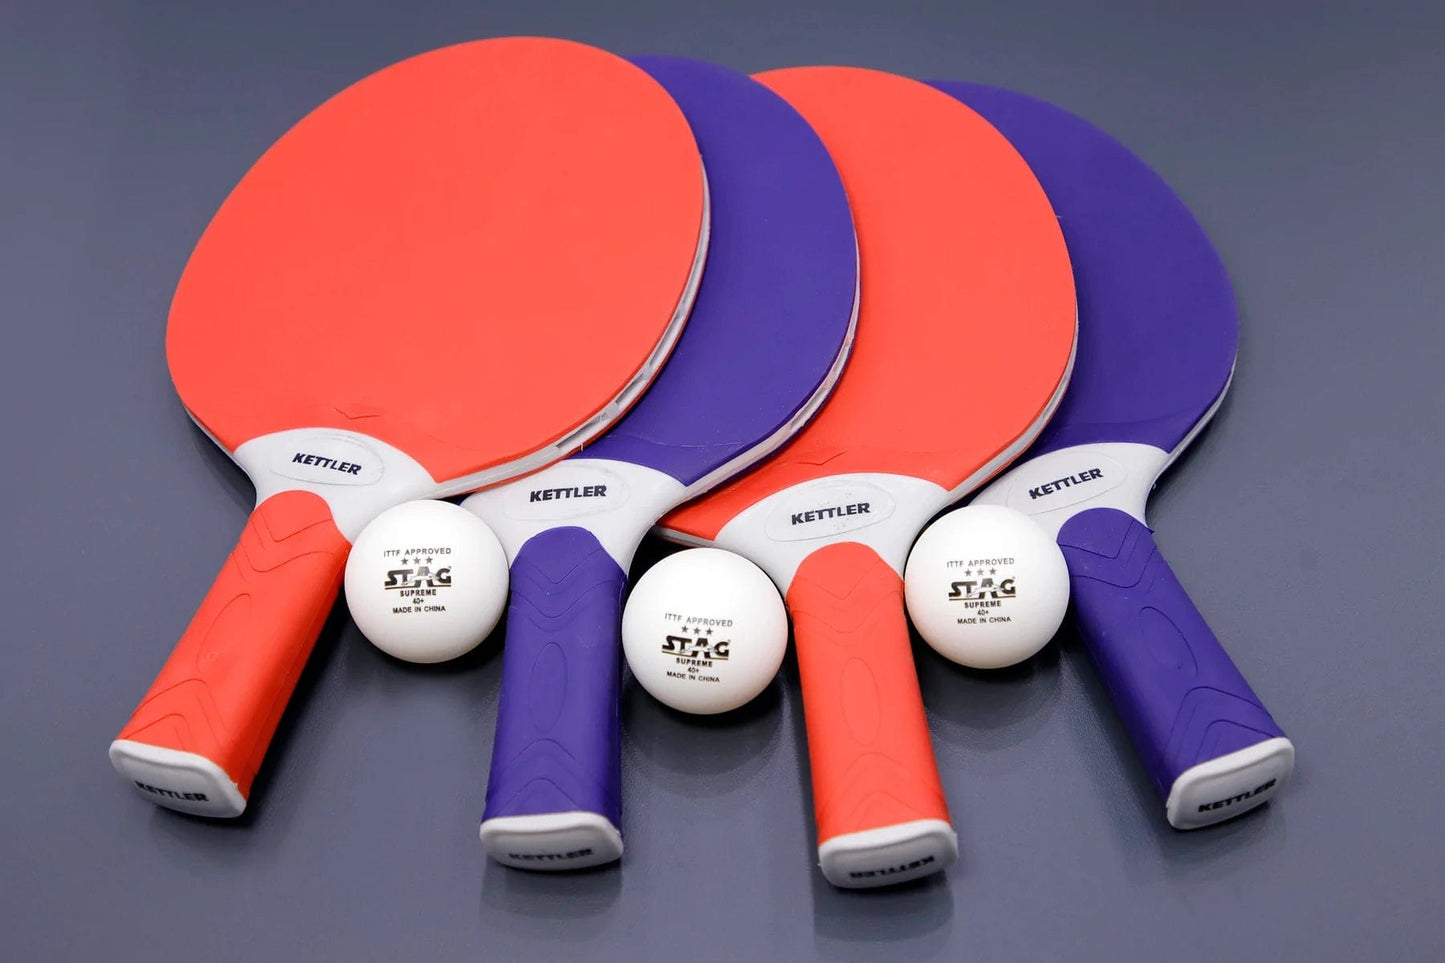 4 Paddles and 12 ping pong balls included 